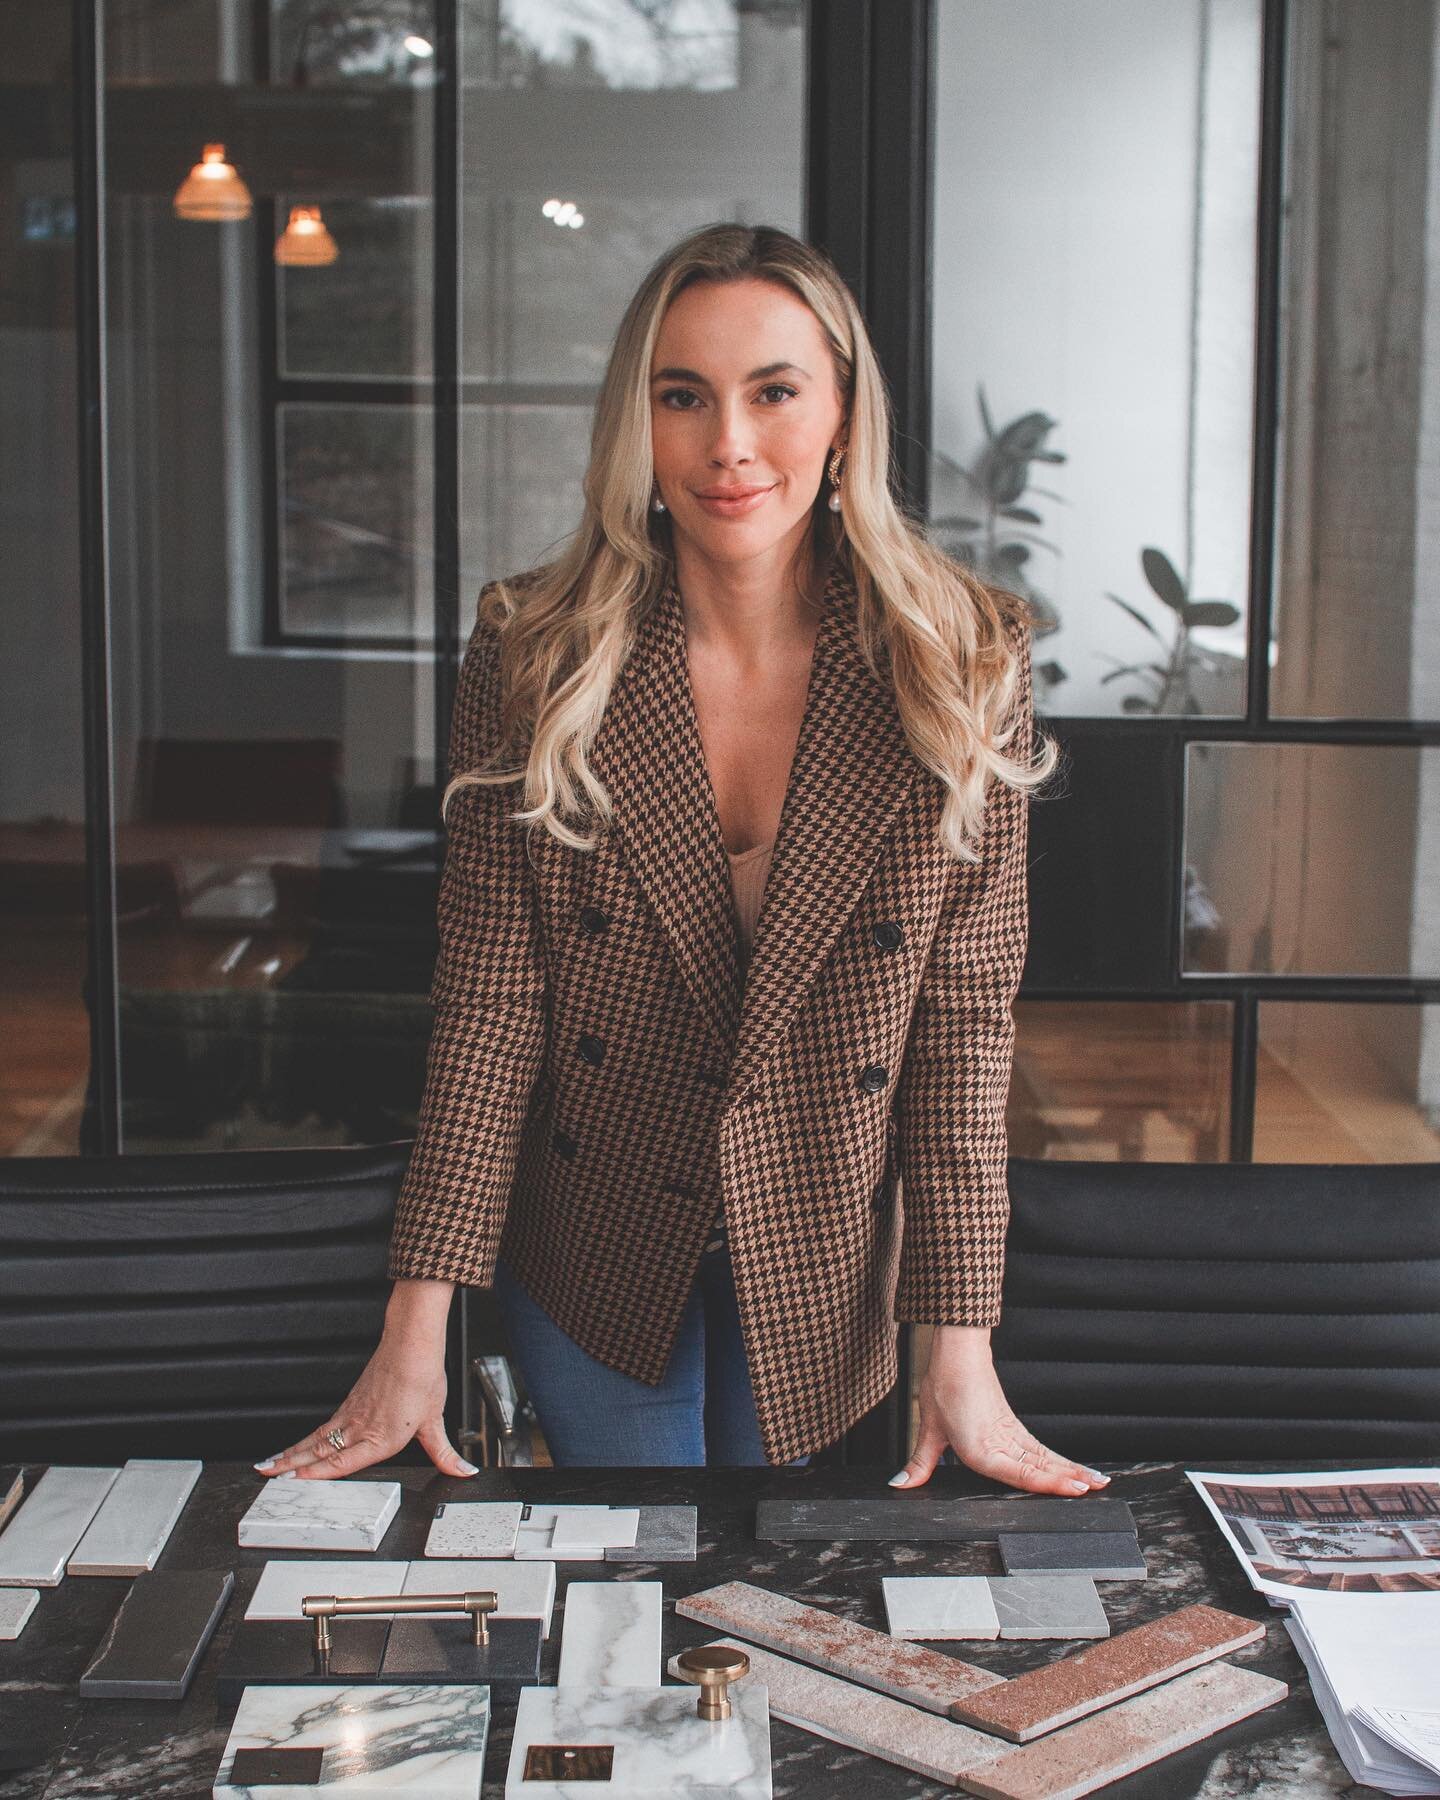 Hi friends! 

It&rsquo;s been a while since I popped on here personally to introduce myself. My name is Mia Parres and I&rsquo;m Principal Designer at MPD Inc!

We are a full-service design firm located in the Beaches, with projects all over the GTA 